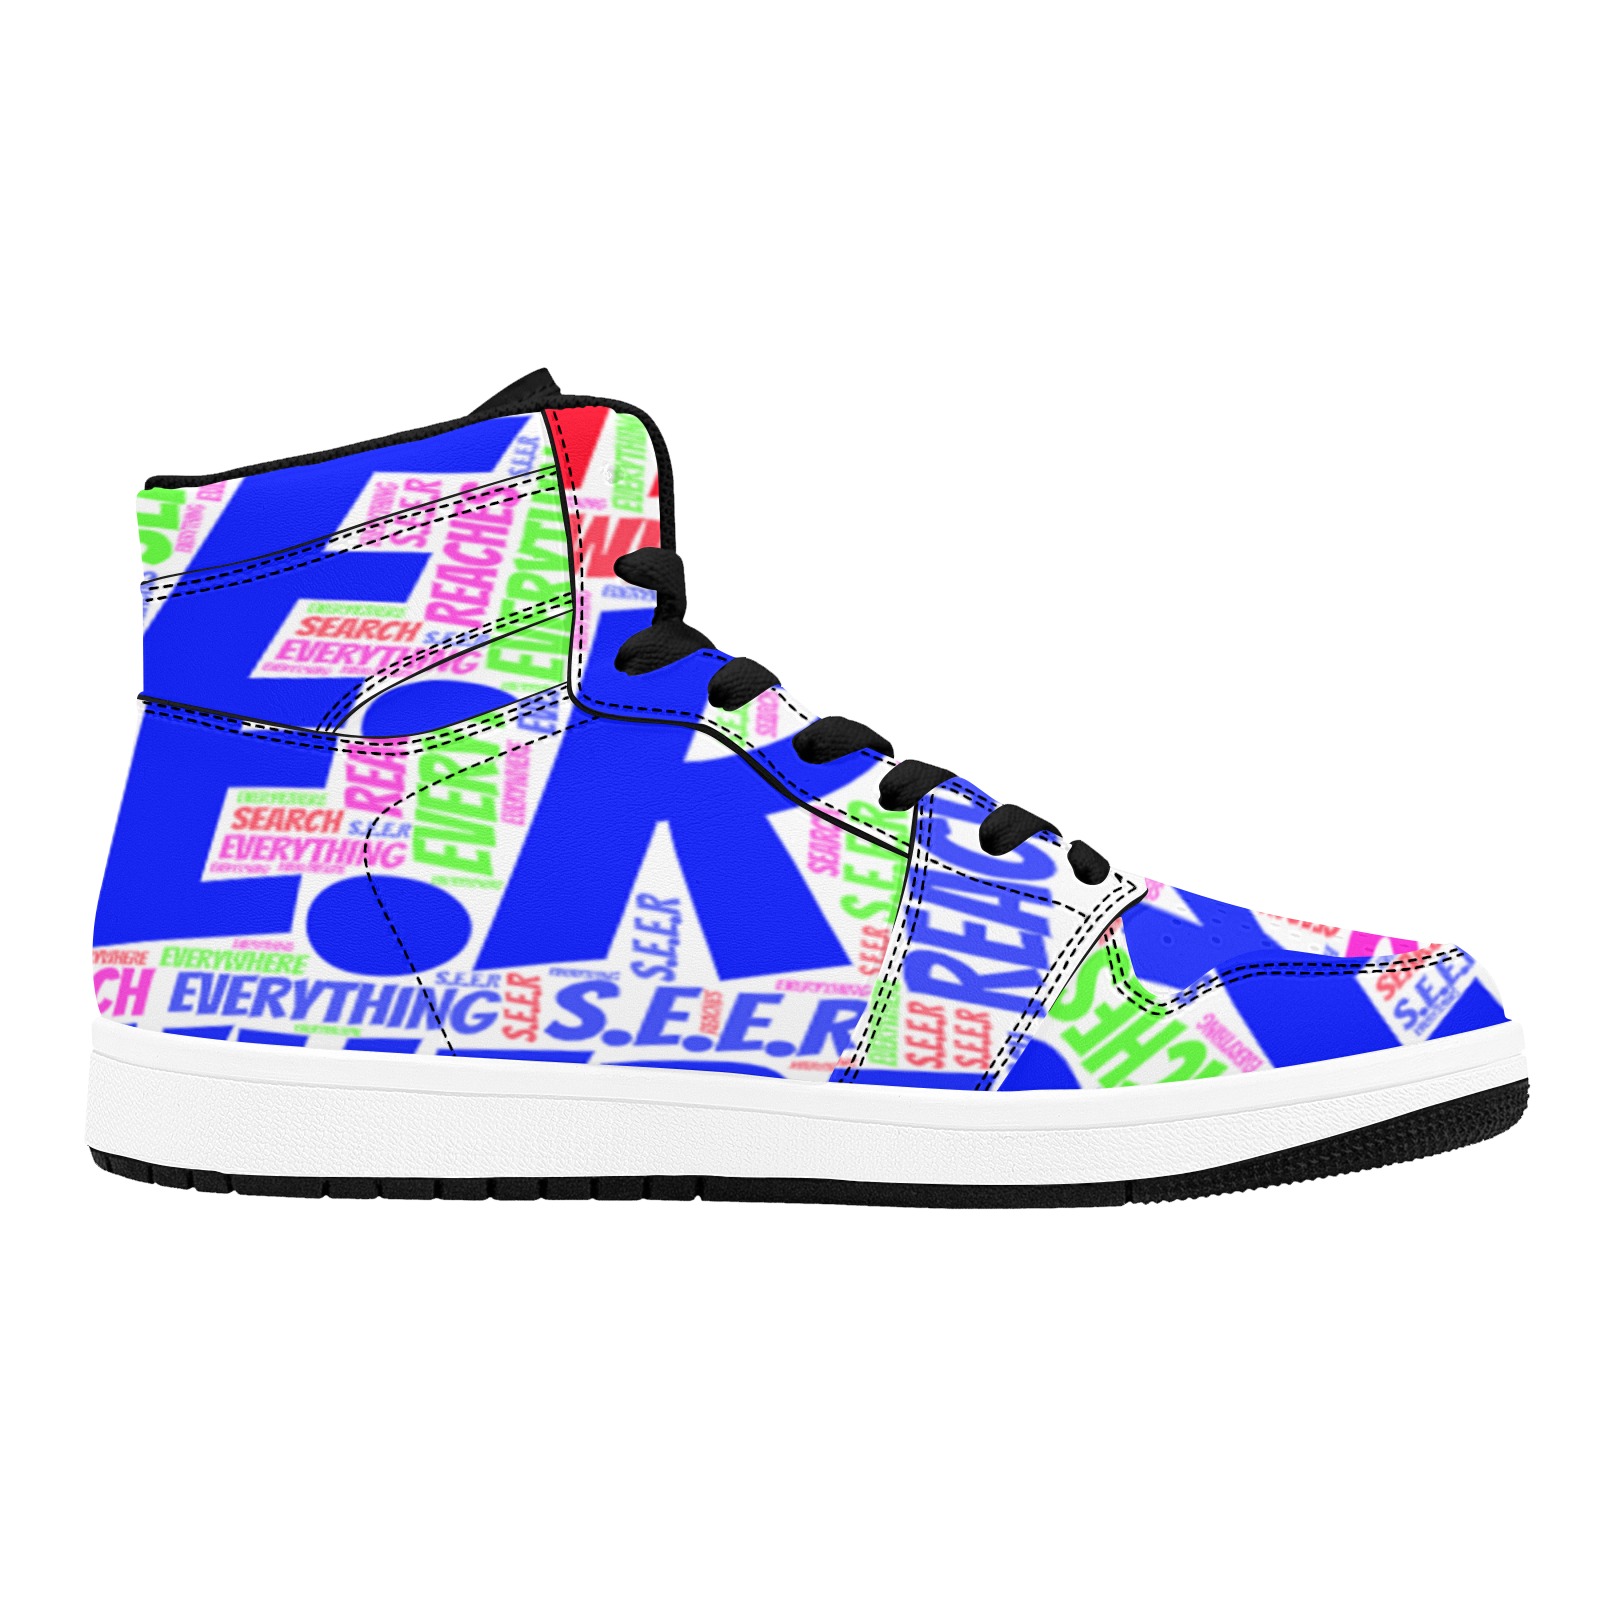 Running logo Shoes Unisex High Top Sneakers (Model 20042)